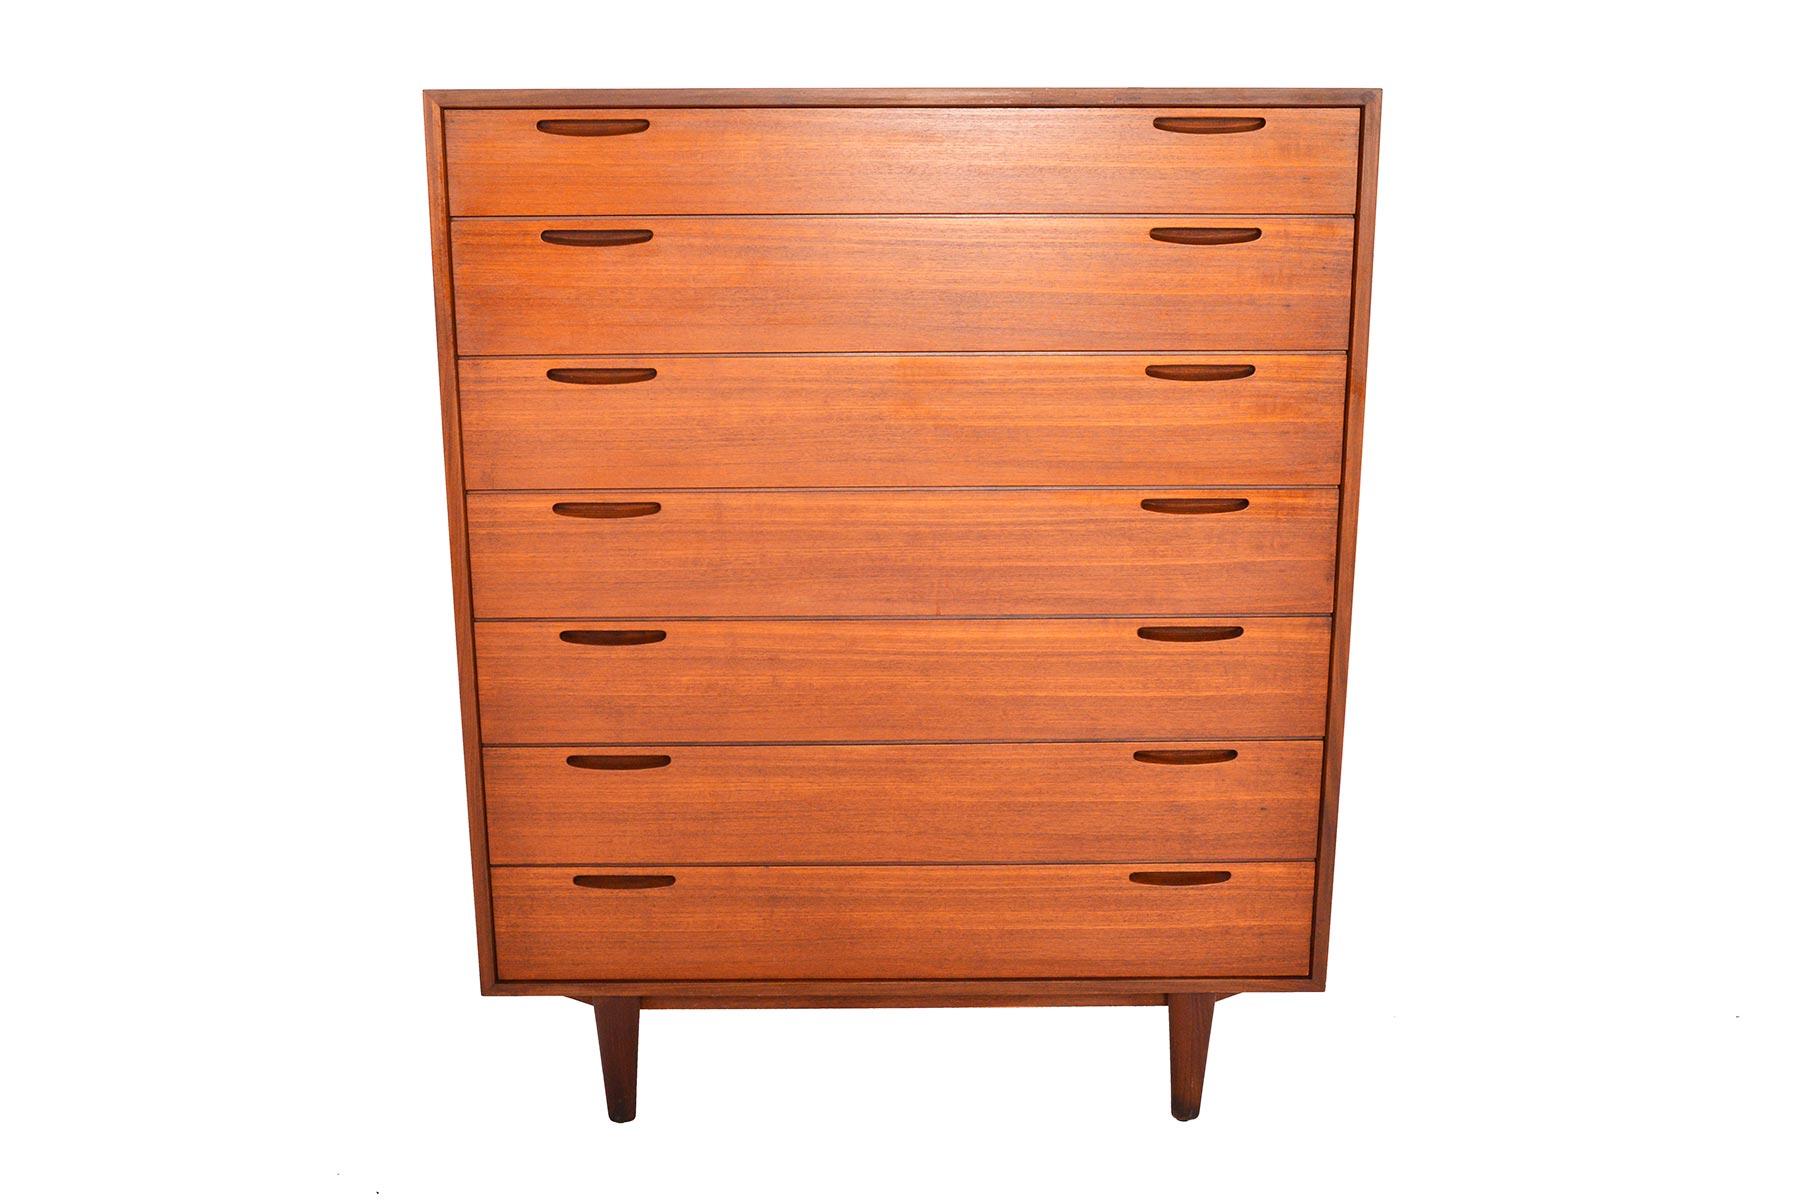 This gorgeous Danish modern seven-drawer midcentury teak highboy dresser was designed by Ib Kofod- Larsen for Brande Møbelfabrik in the 1960s. Rich woodgrain and high quality construction define this Classic piece. Each drawer features two carved